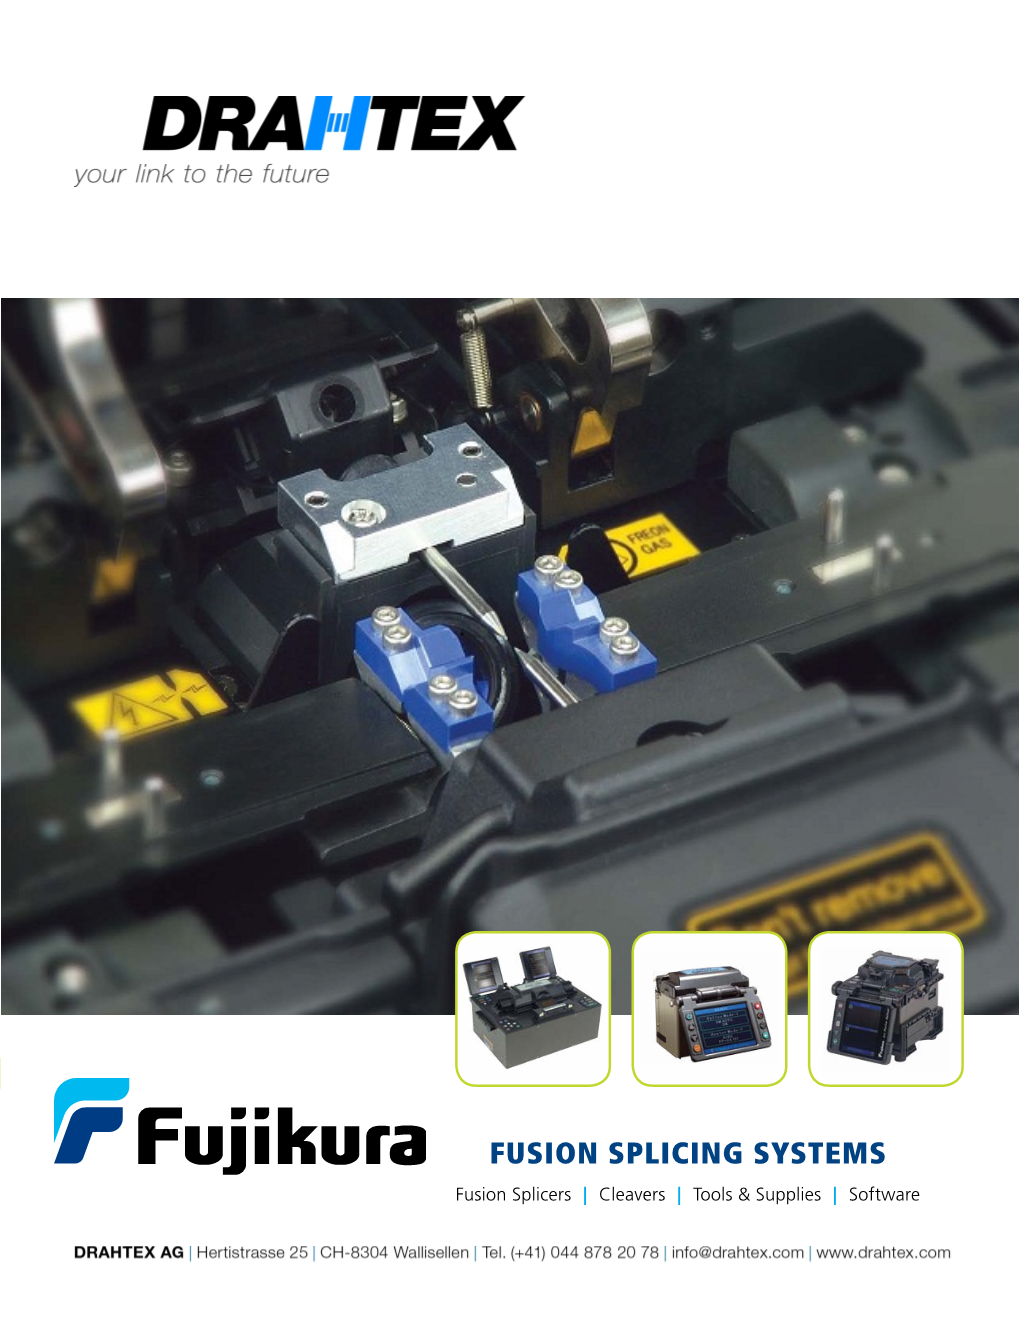 FUSION SPLICING SYSTEMS Fusion Splicers | Cleavers | Tools & Supplies | Software Table of Contents